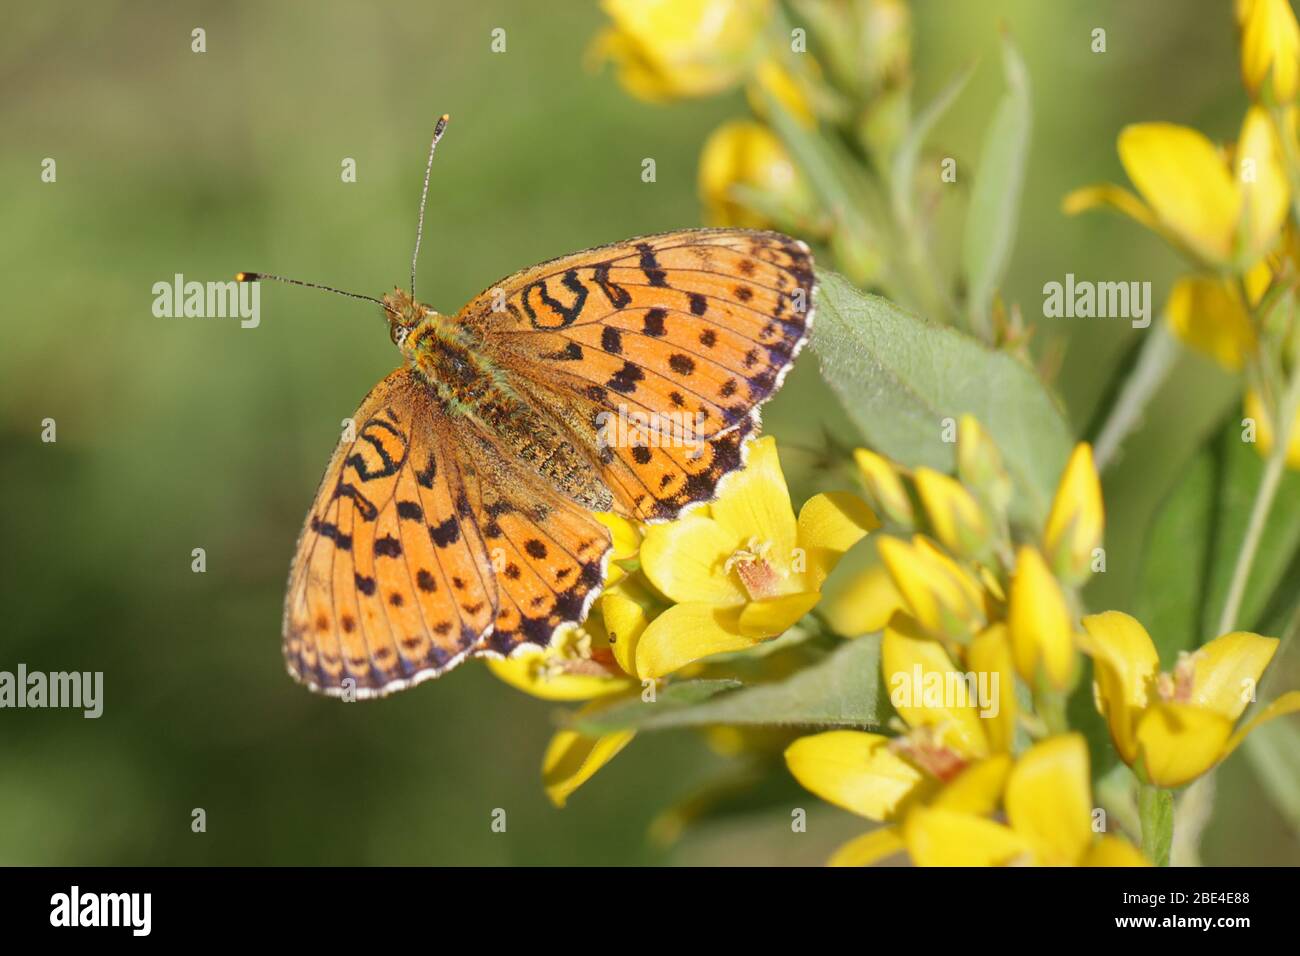 Brenthis ino, commonly known as the lesser marbled fritillary, a butterfly of the family Nymphalidae photographed in Finland Stock Photo